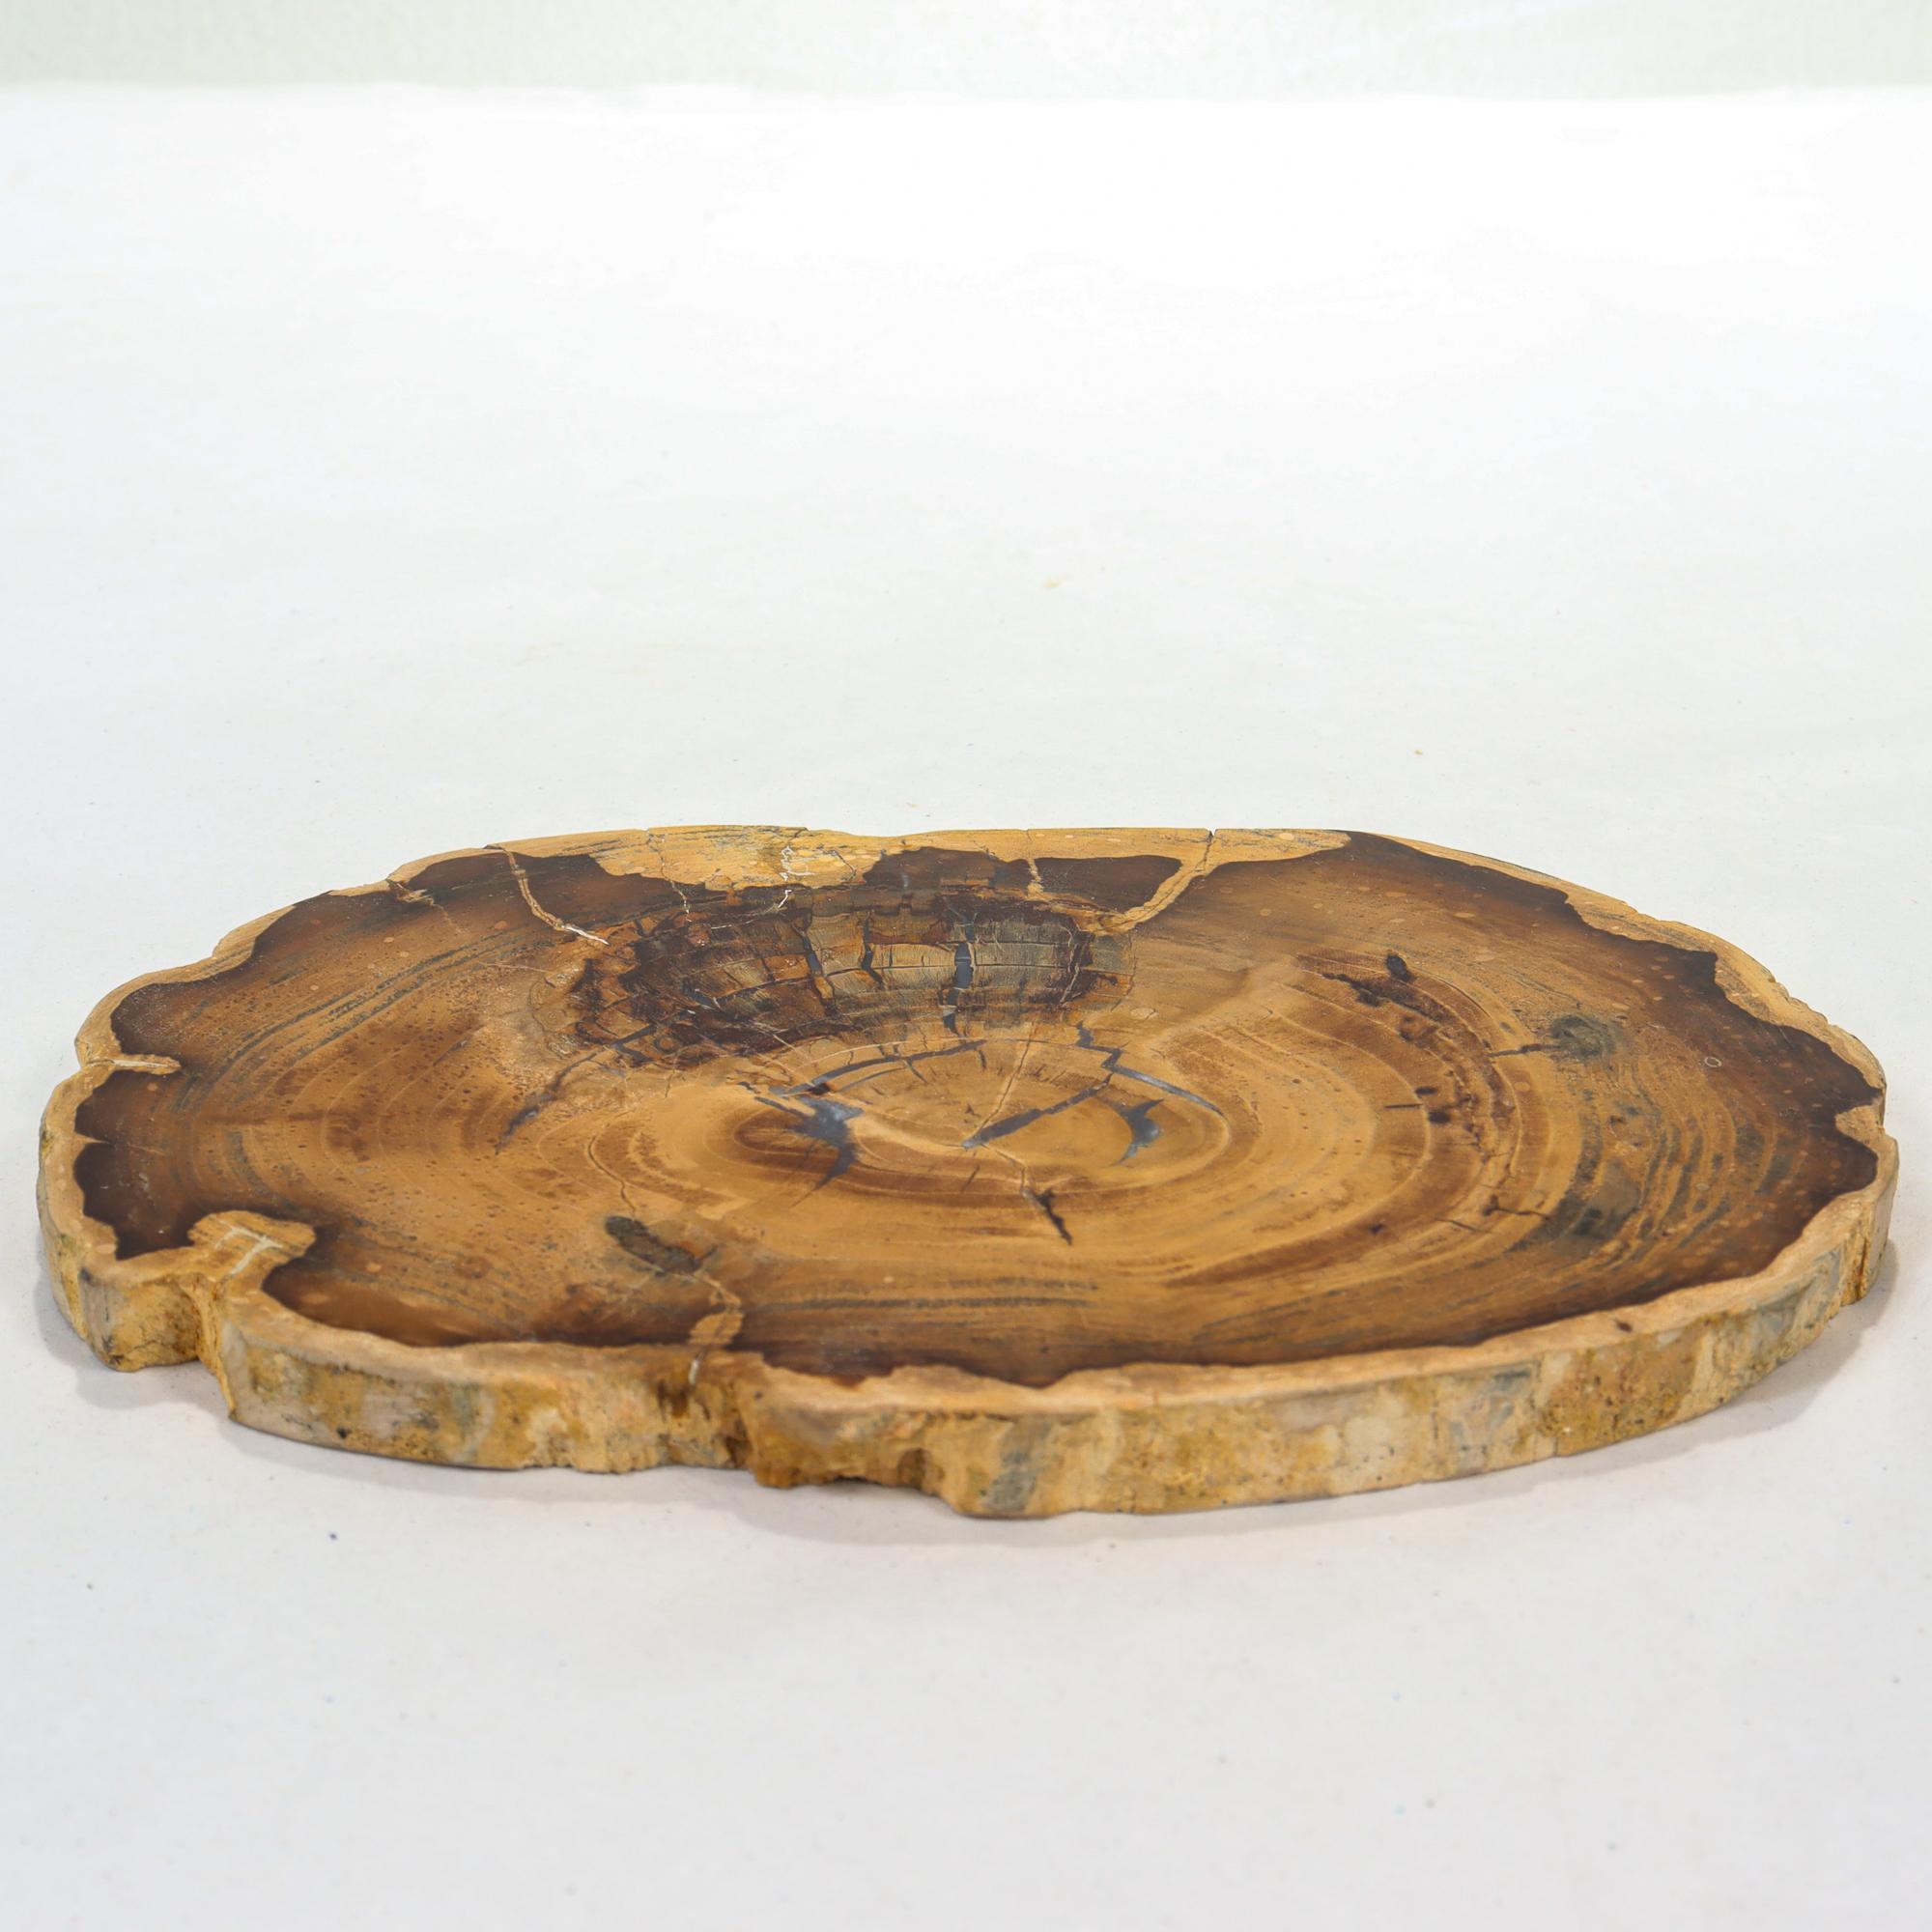 A fine petrified wood specimen. 

Perfect for use on the bar or table as a trivet.

An old collector's record indicates that it is a species of cherry from Mcdermitt, Oregon.

Simply a great petrified wood